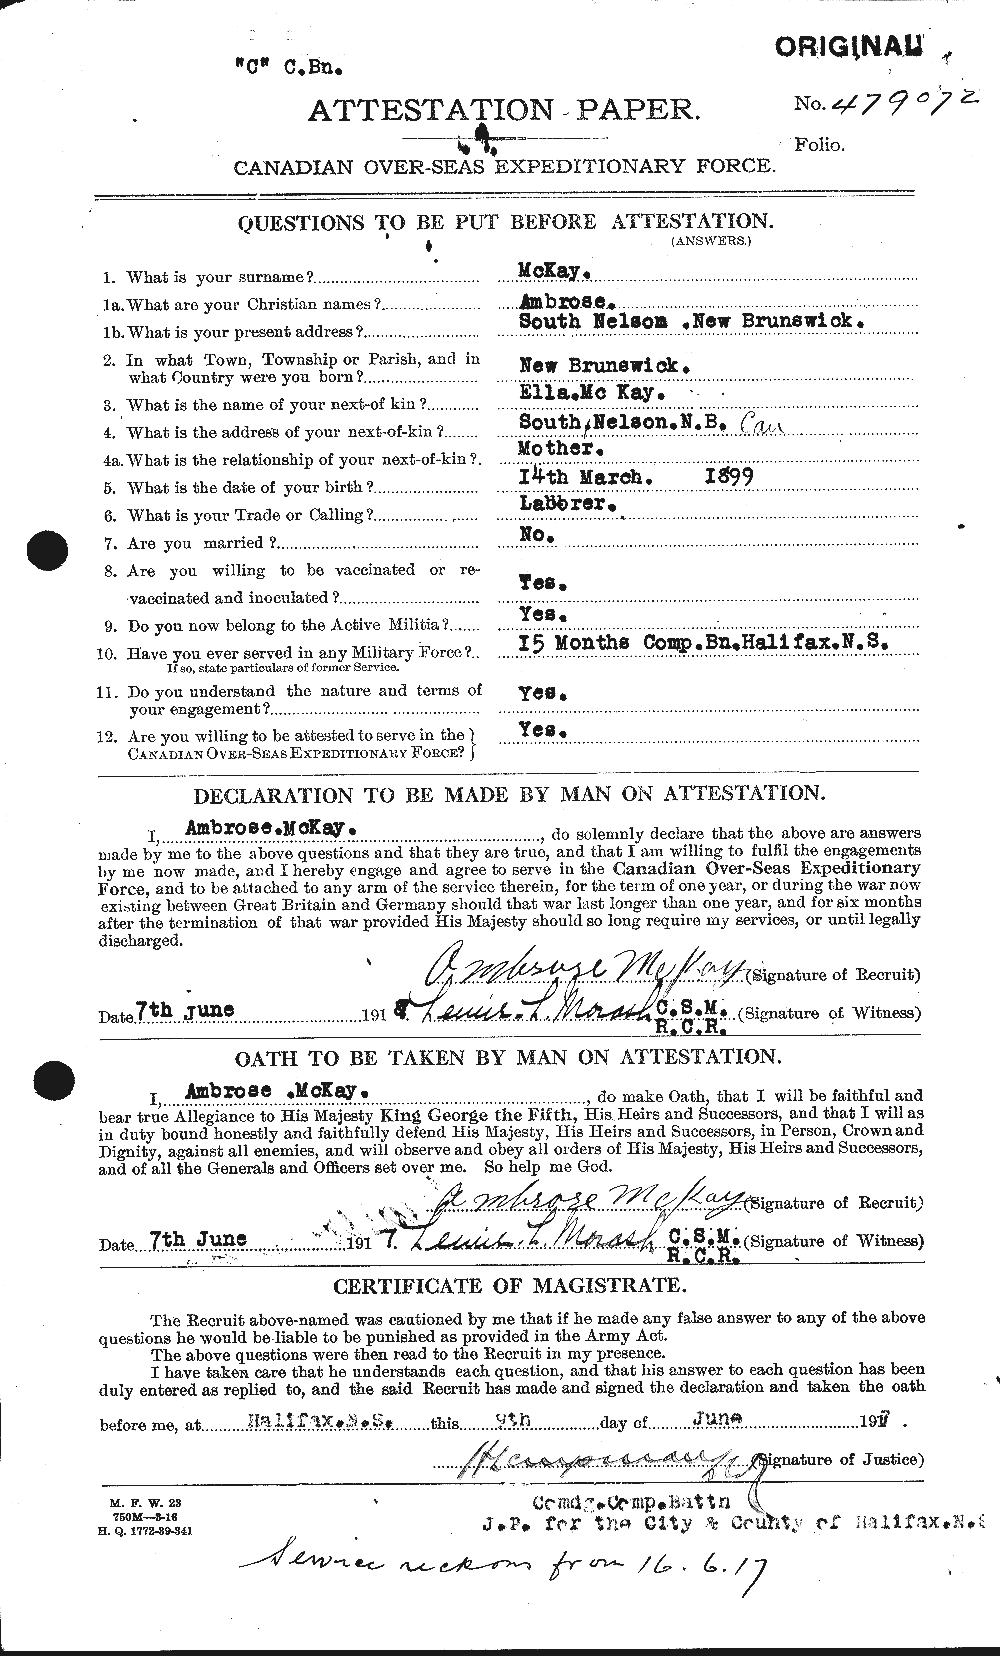 Personnel Records of the First World War - CEF 530968a